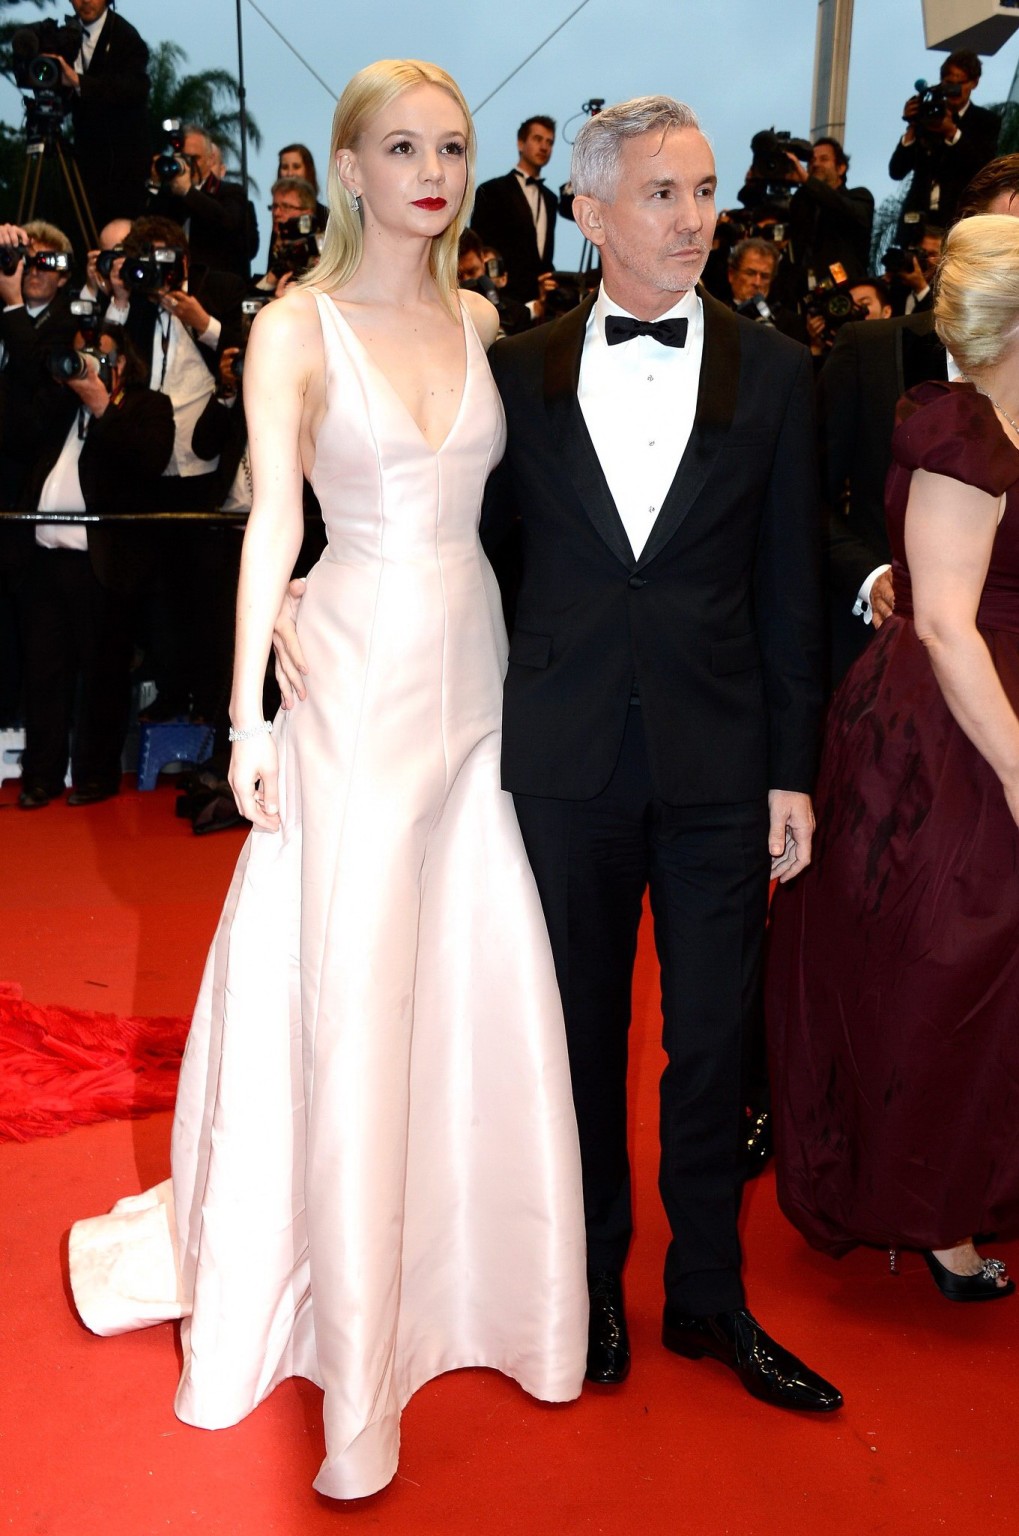 Busty Carey Mulligan showing side boob  cleavage at the 66th annual Cannes Film  #75232336